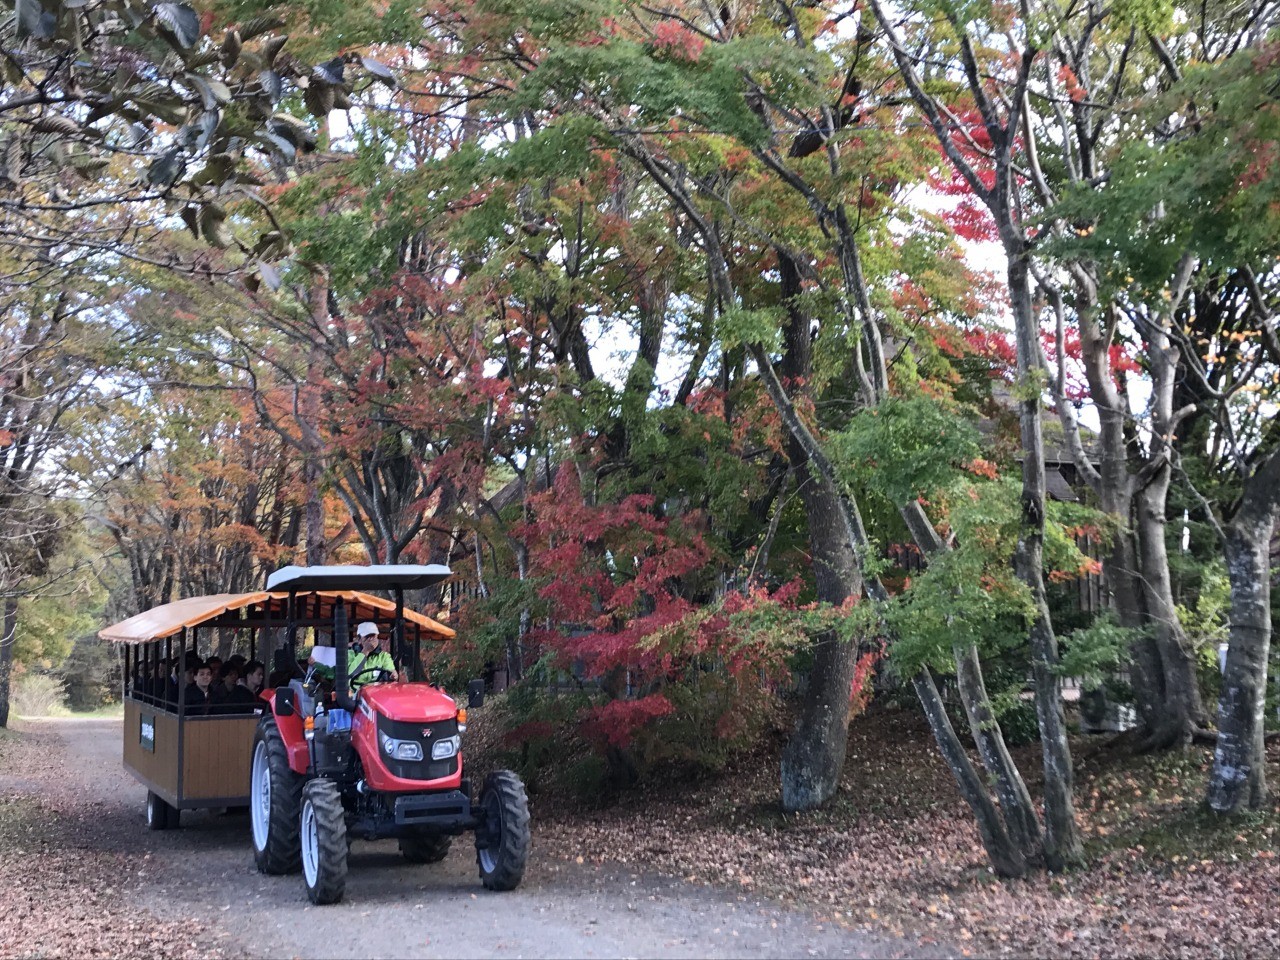 Farm Tractor Ride Through a Tunnel of Autumn Leaves